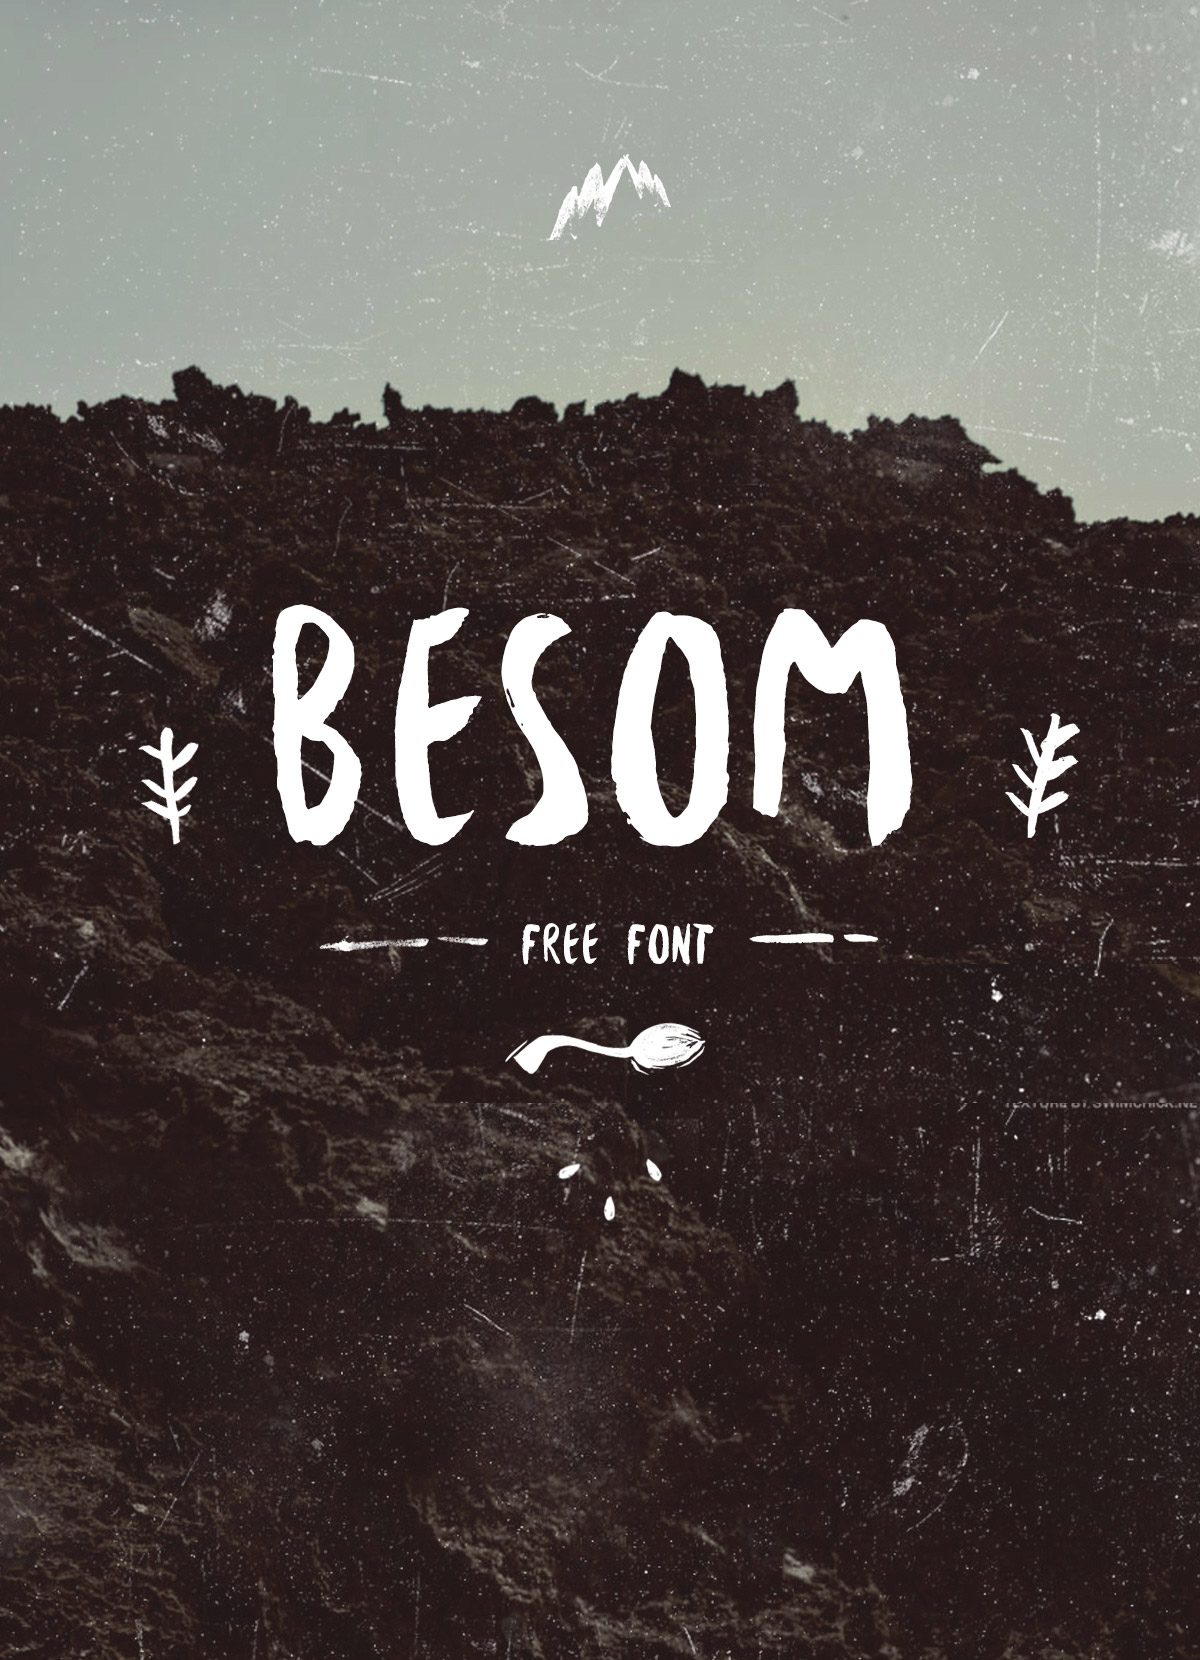 Example font Besom #1